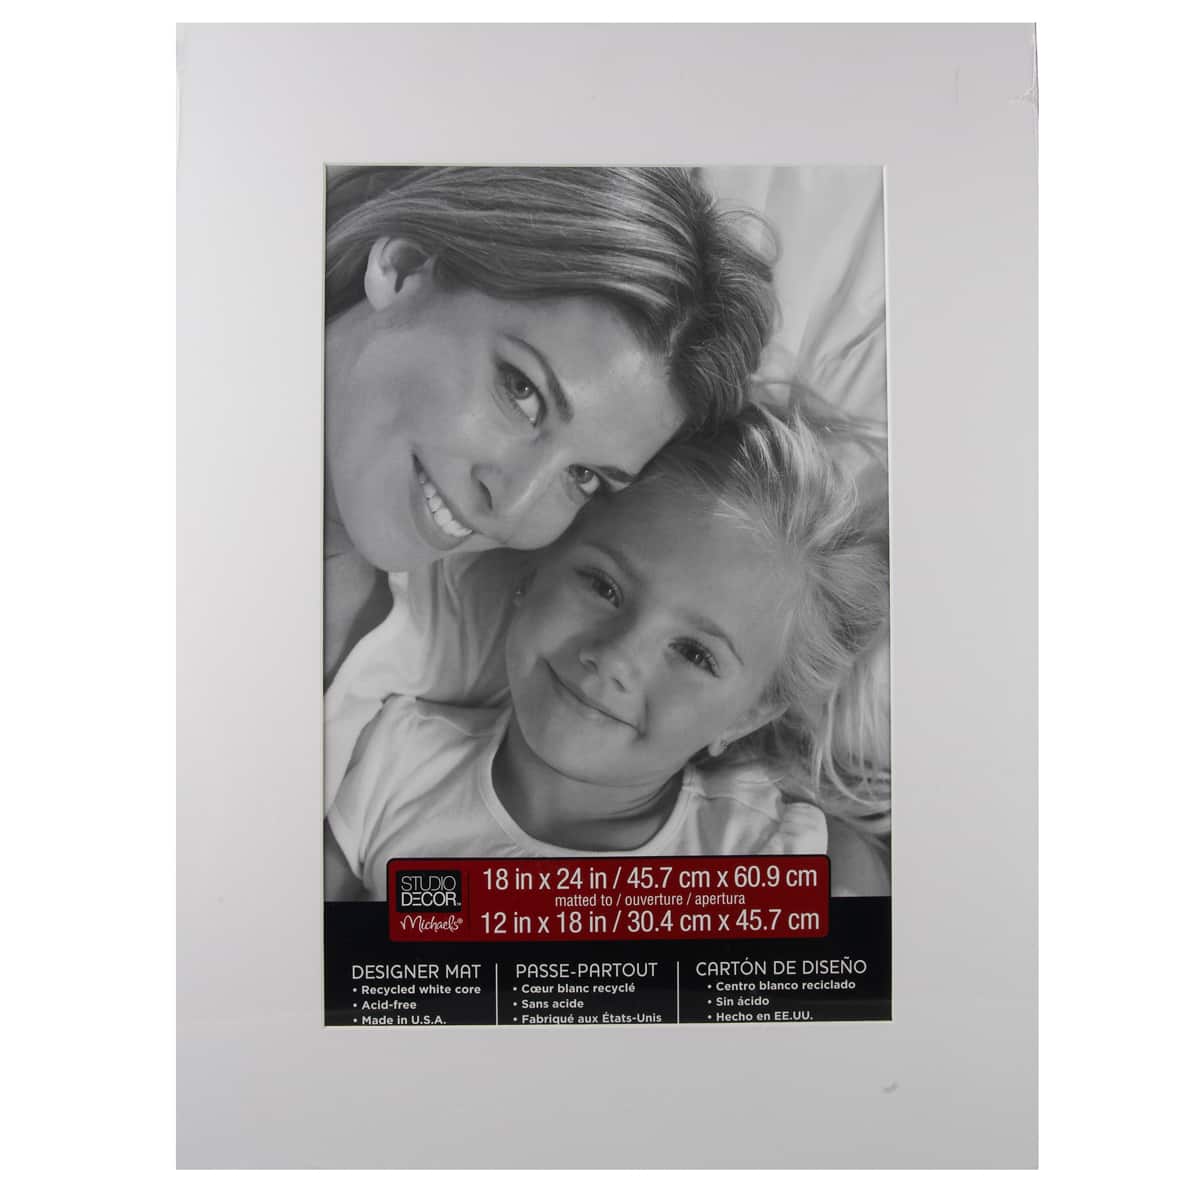 16x20 Mat for 20x24 Frame - Precut Mat Board Acid-Free Black 16x20 Photo Matte Made to Fit A 20x24 Picture Frame